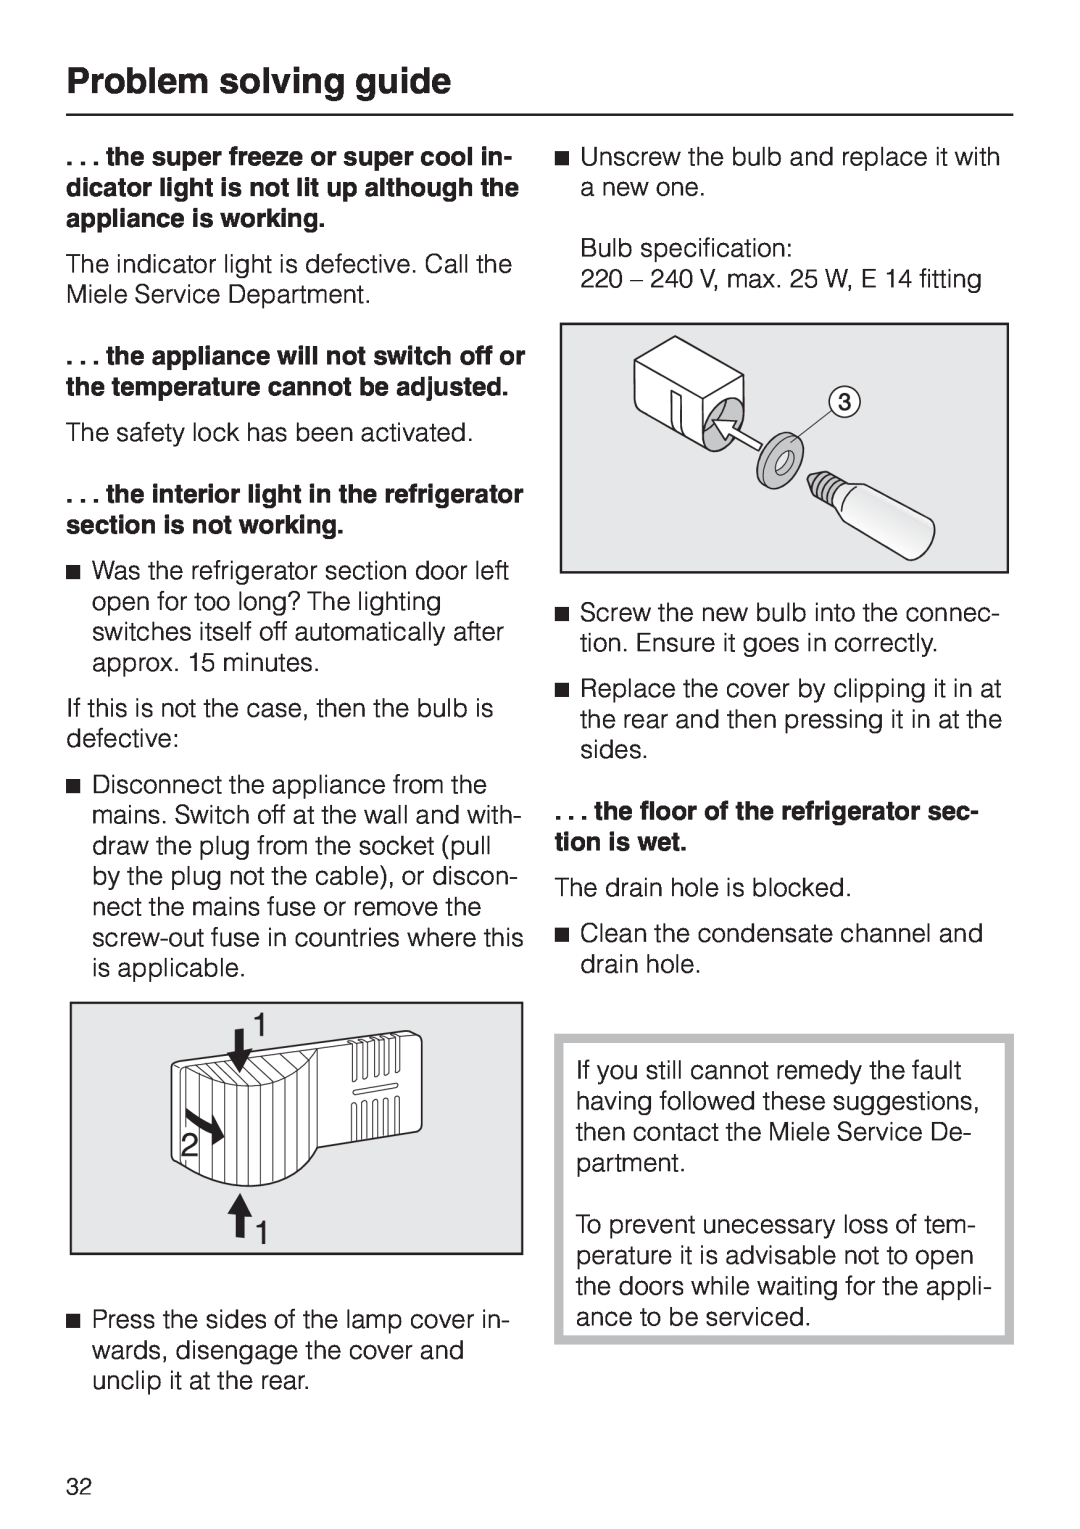 Miele KF 7544 installation instructions Problem solving guide, the floor of the refrigerator sec- tion is wet 